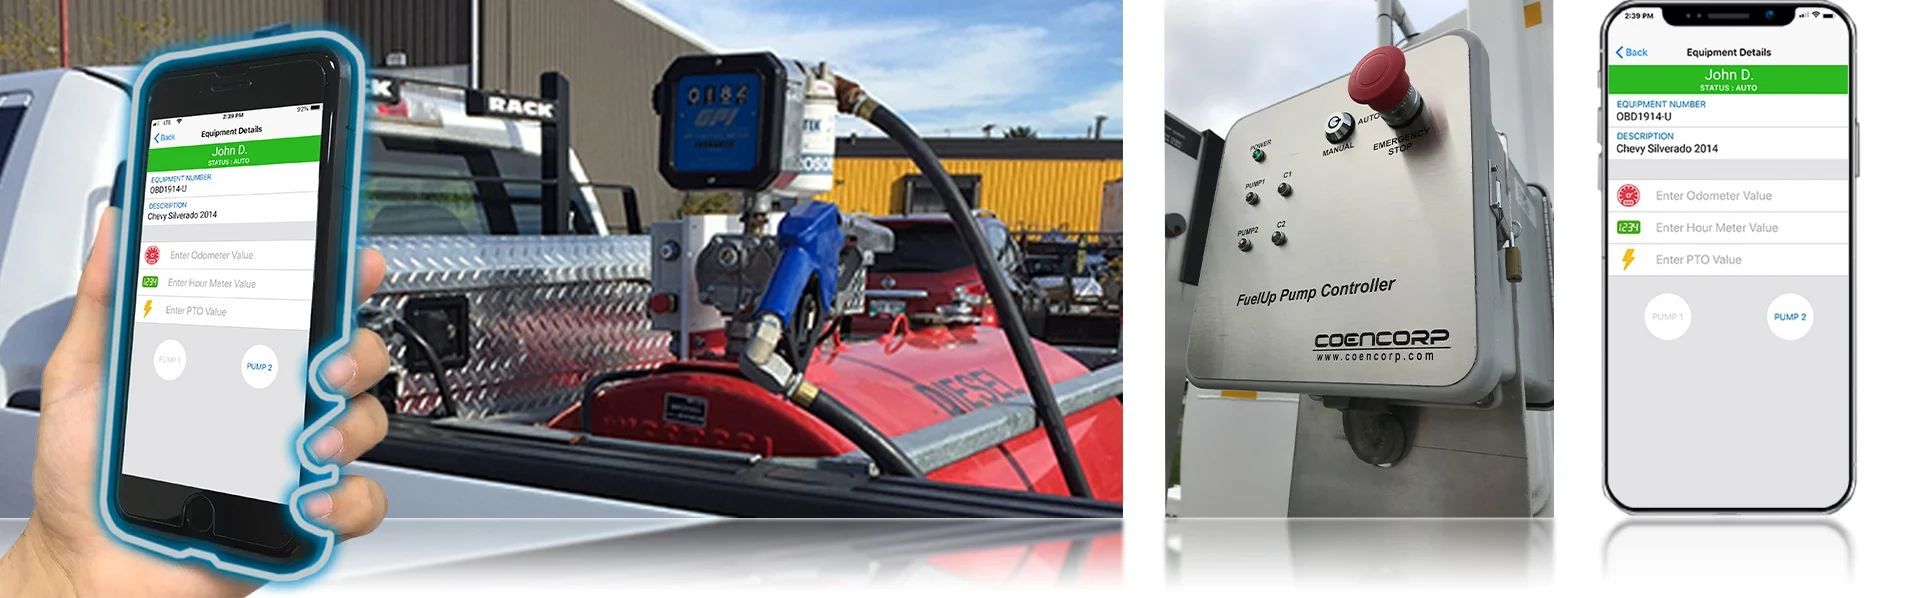 fuel-up-mobile-system-for-small-fleets-with-cell-phone-app